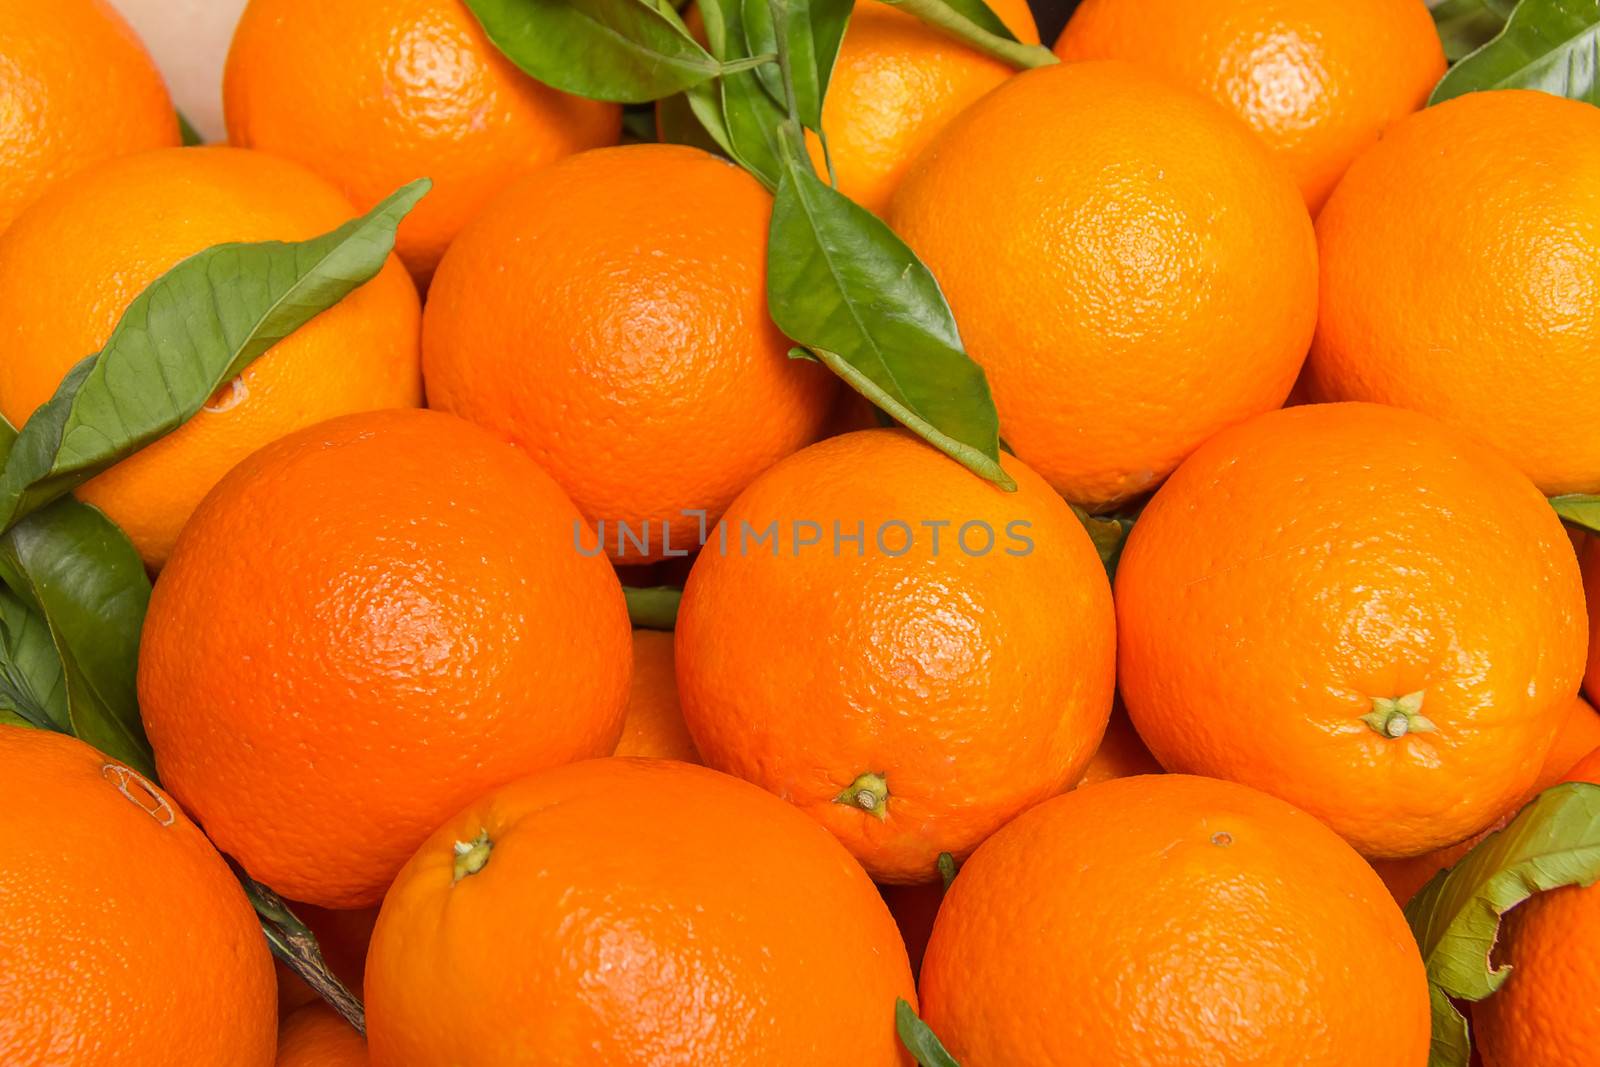 Tasty valencian oranges freshly collected by doble.d